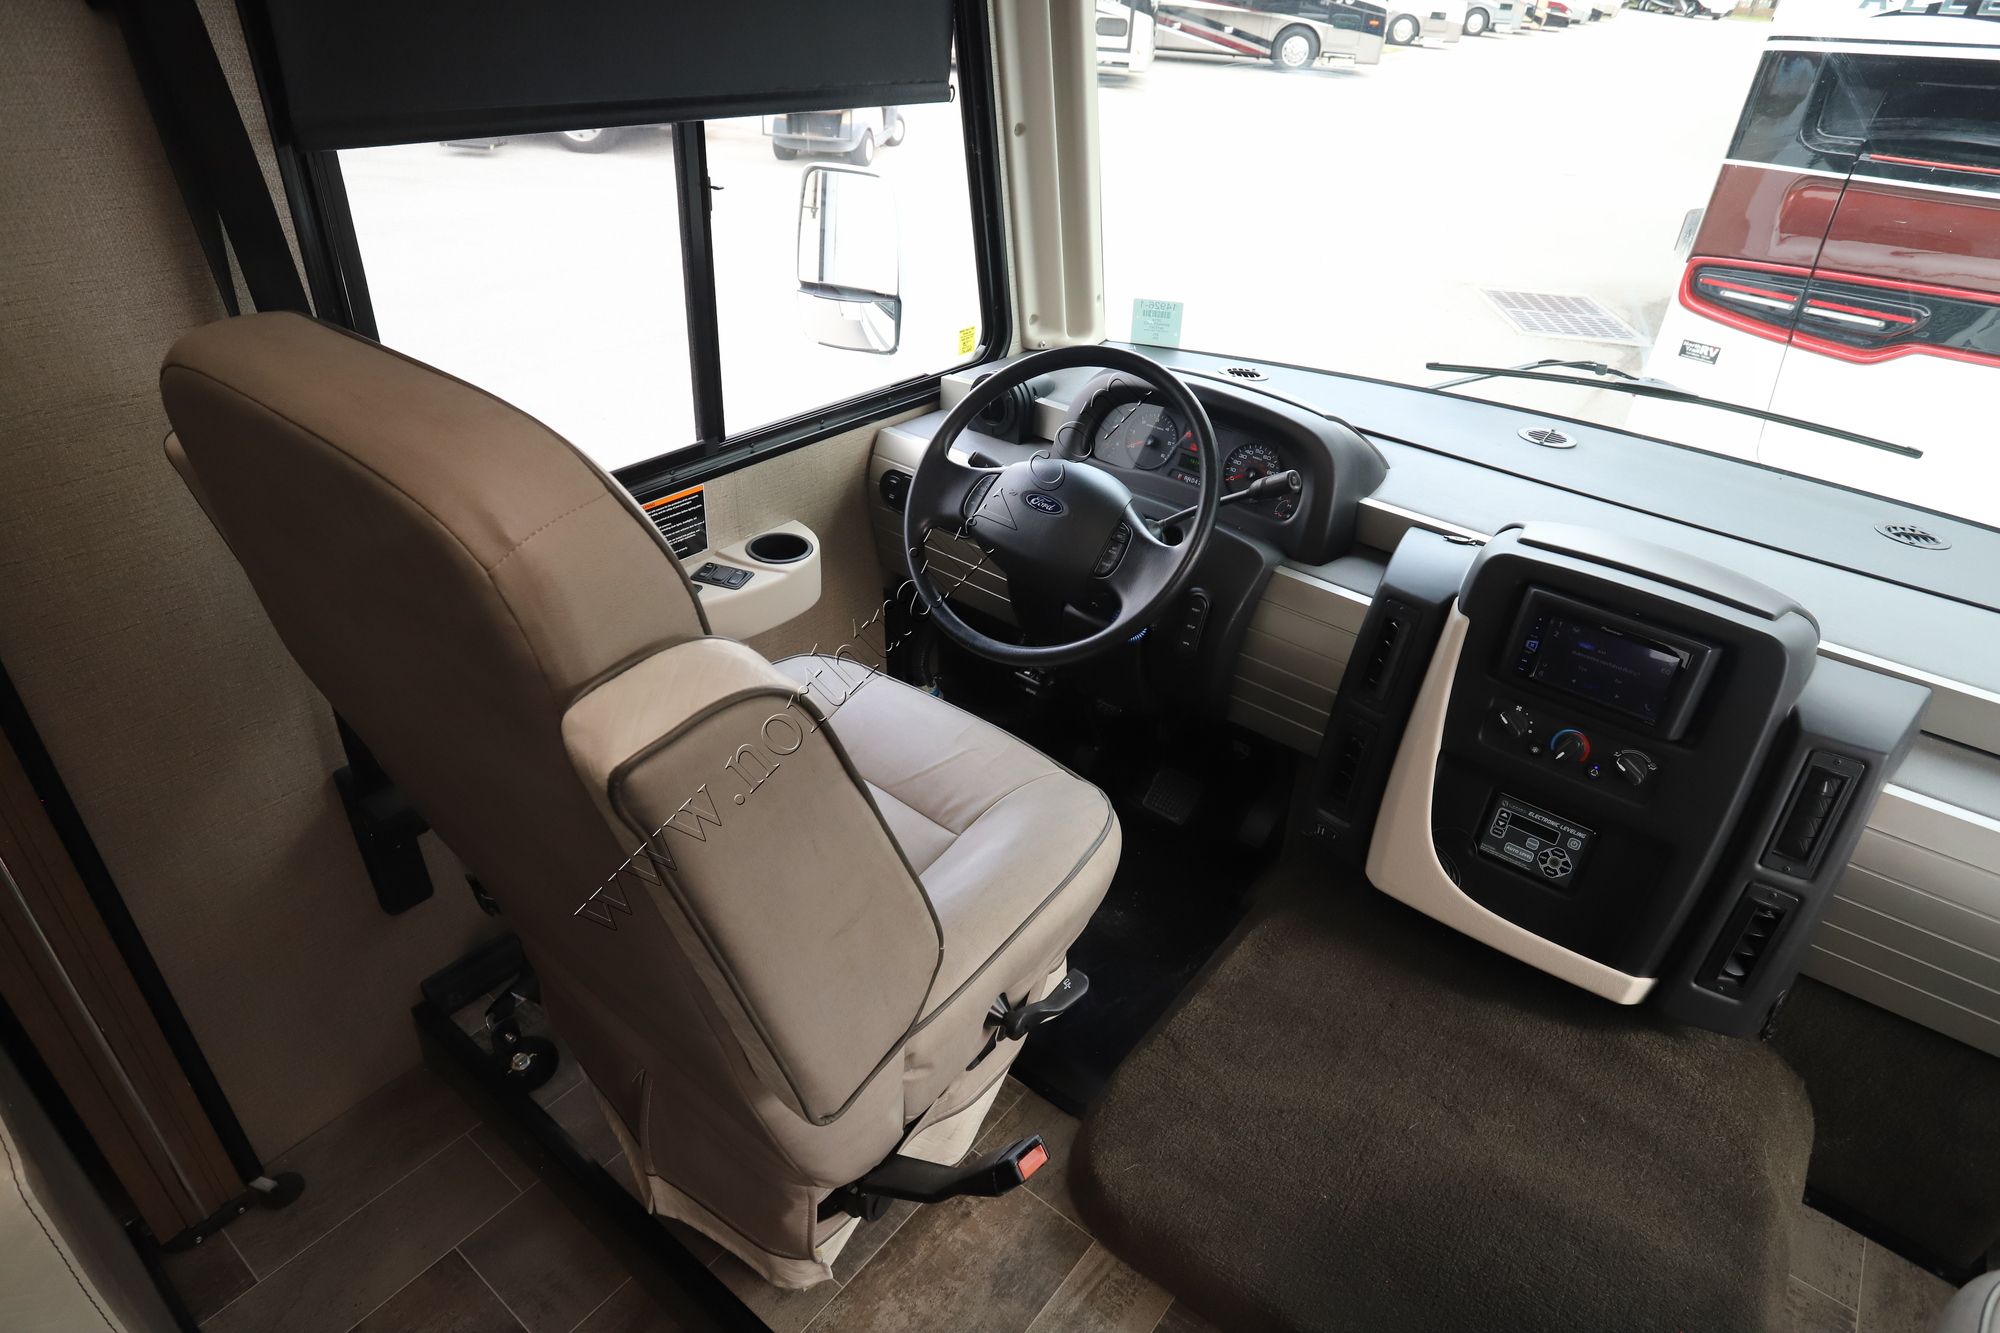 Used 2018 Winnebago Intent 29L Class A  For Sale